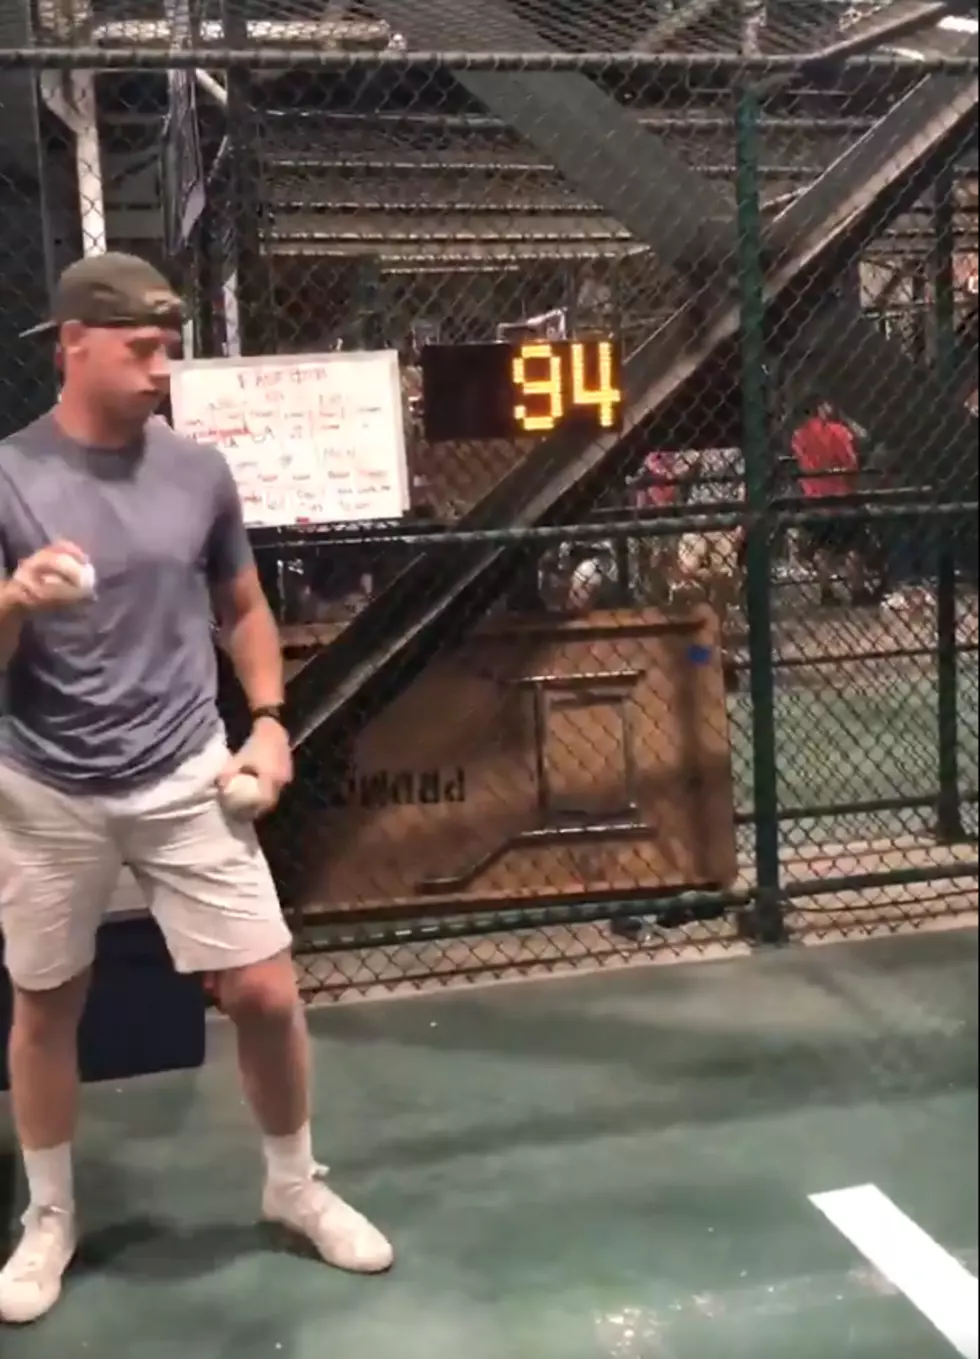 Fan Throws 94 mph Fastball, Gets Signed by Pro Team